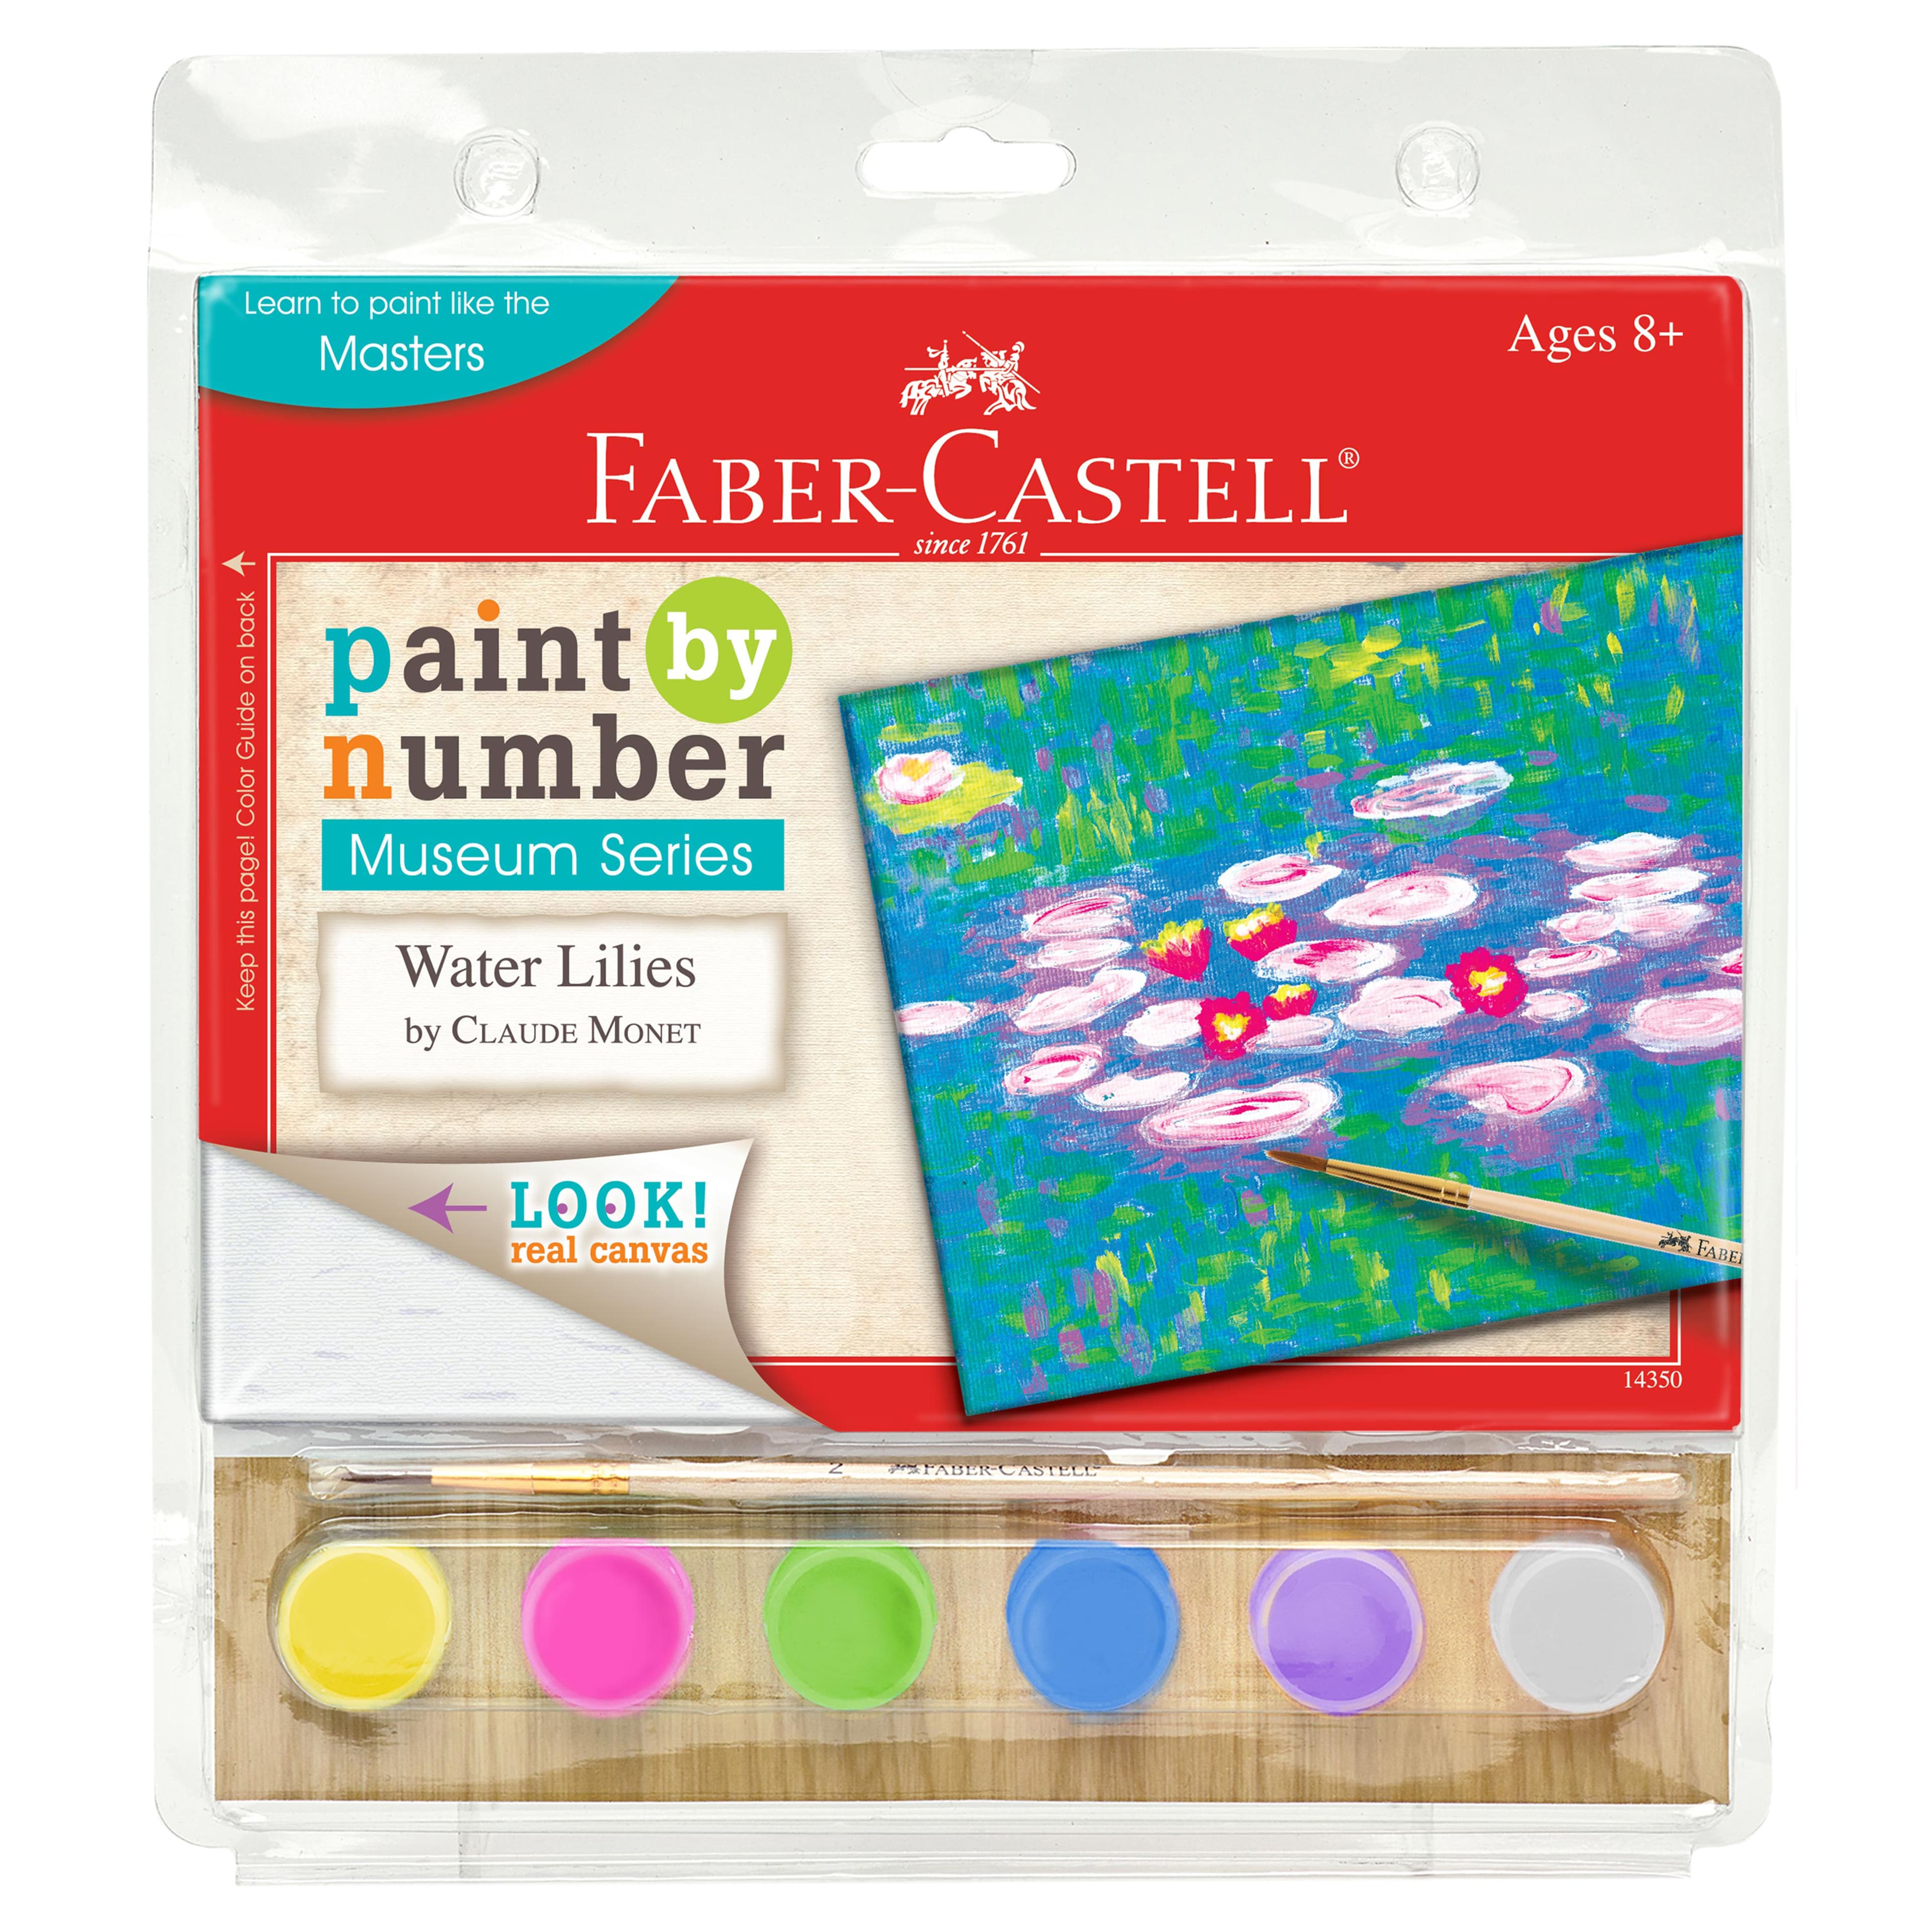 Faber-Castell Paint by Number Museum Series, Water Lilies